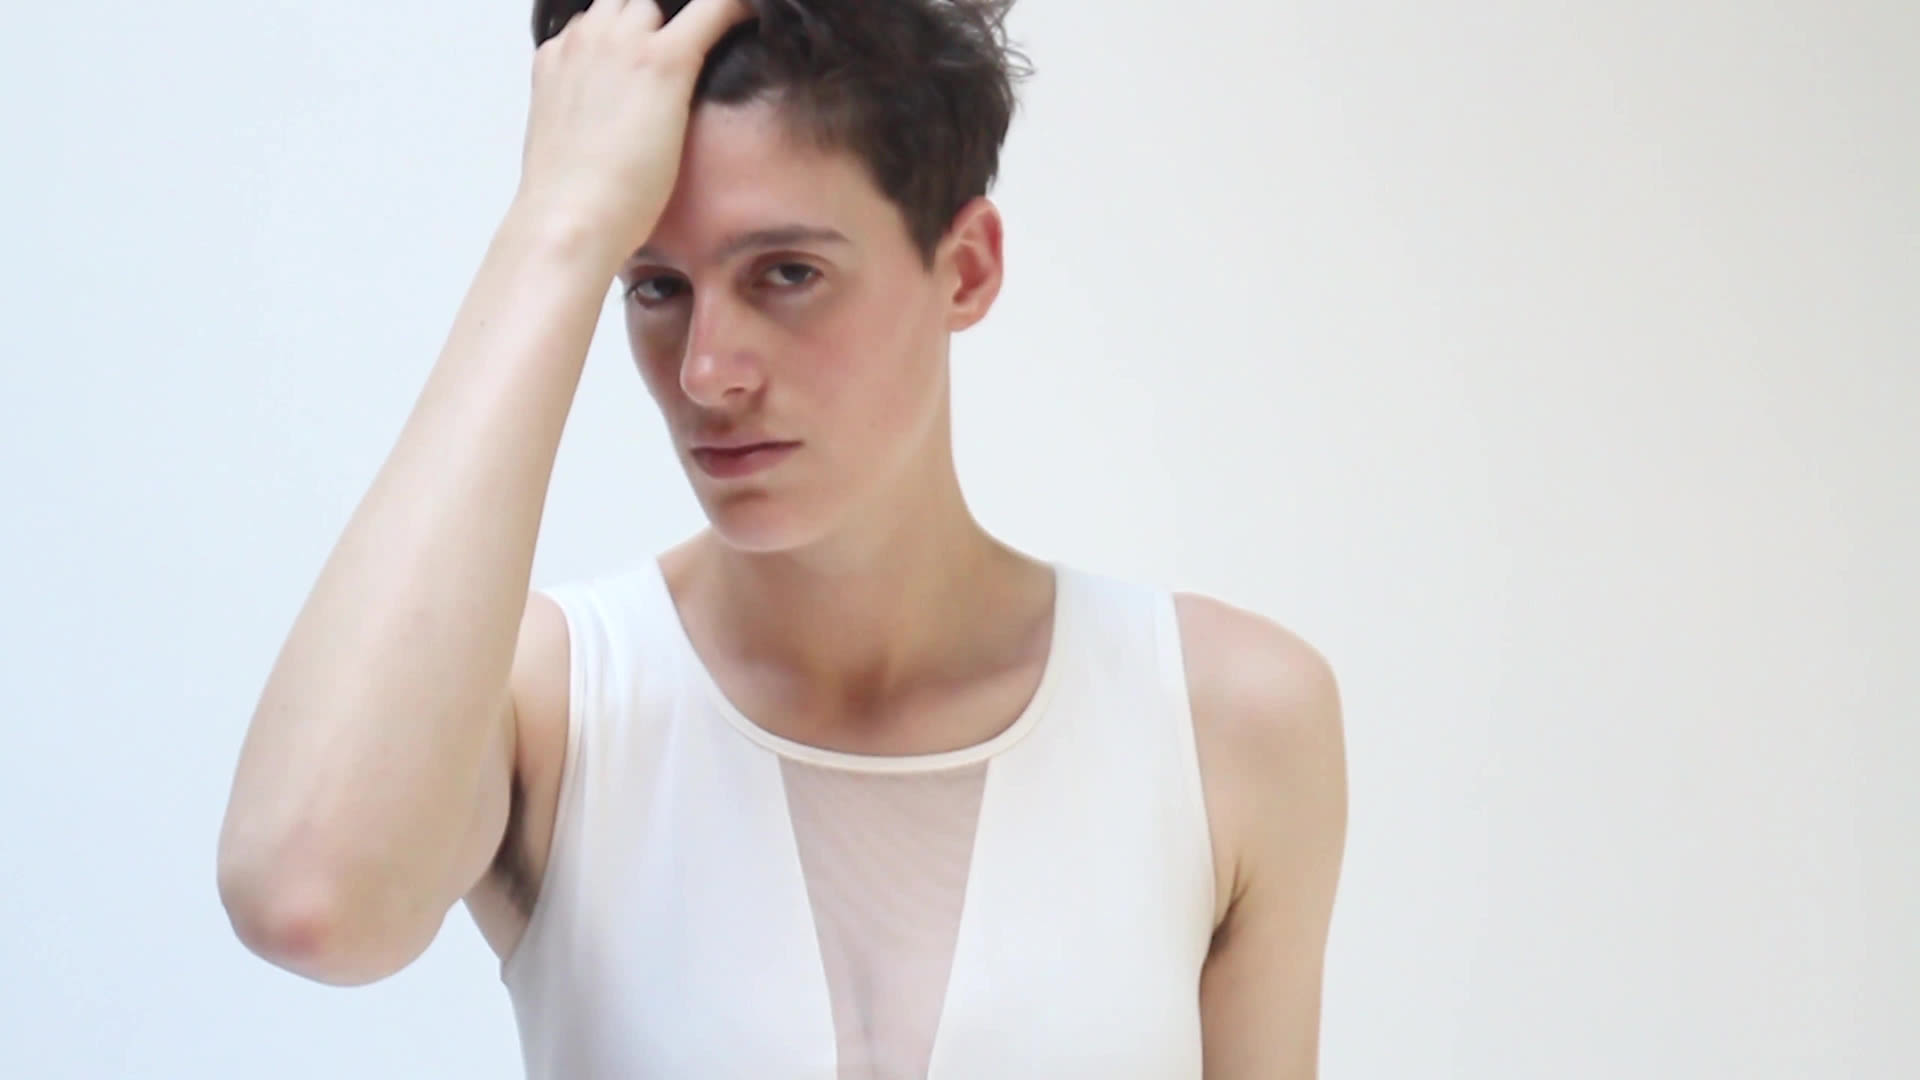 Watch Model Rain Dove Breaks Down The Difference Between Gender And Sex Dispelling Beauty